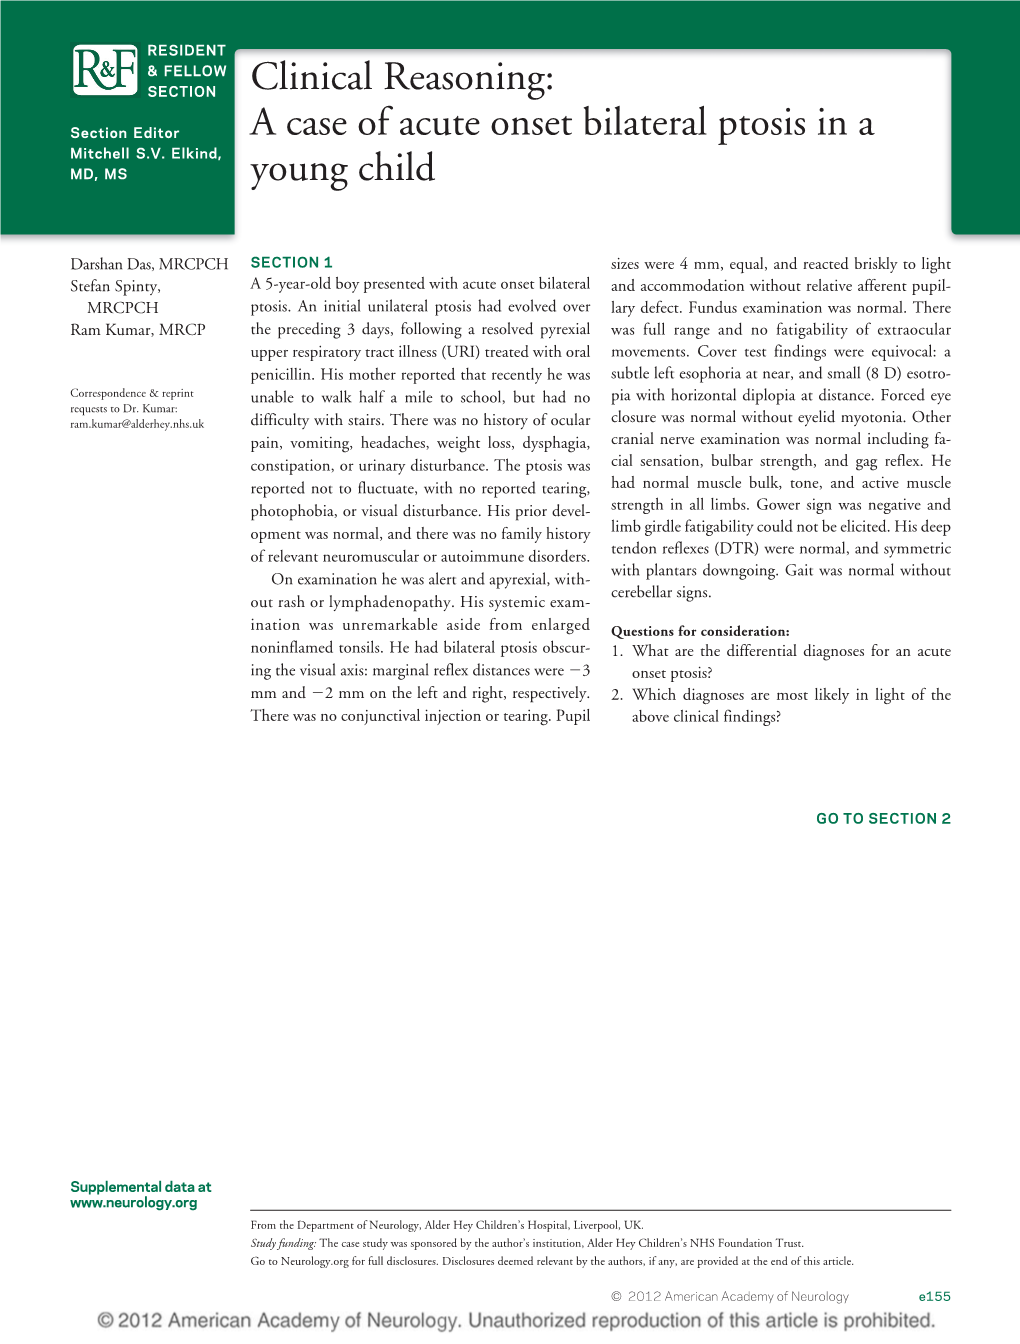 Clinical Reasoning: a Case of Acute Onset Bilateral Ptosis in a Young Child